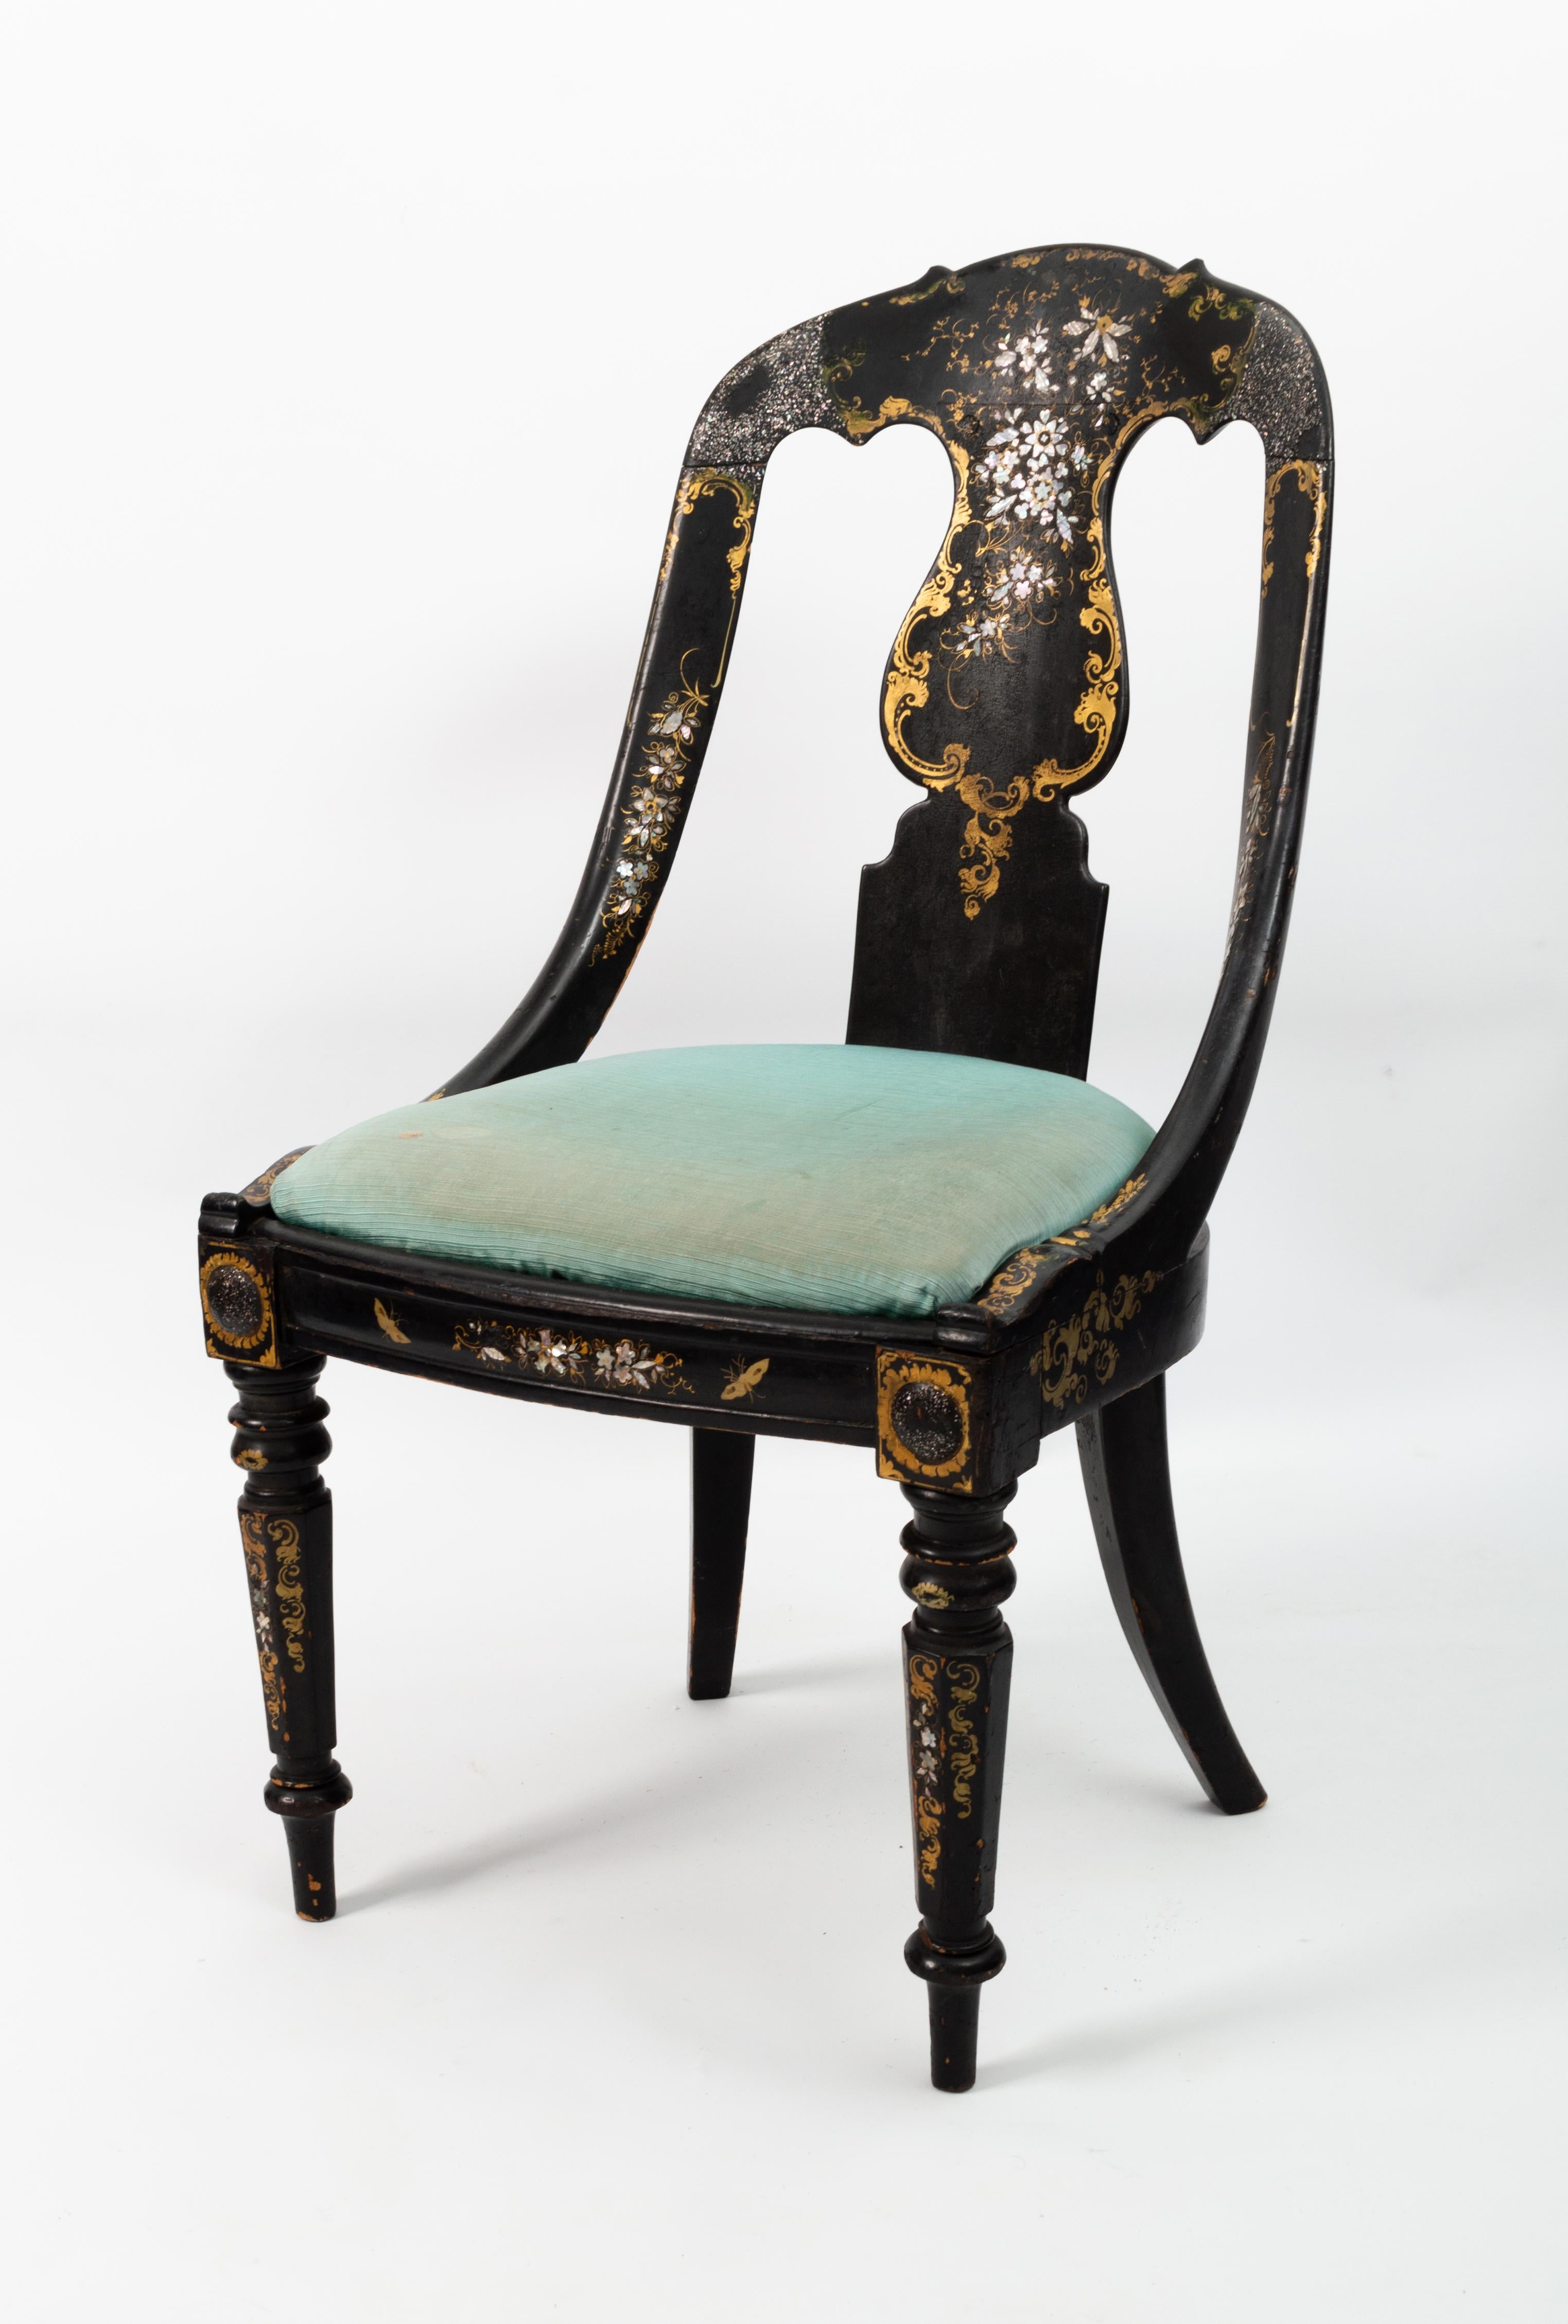 William IV Antique English 19th Century Lacquered  Mother-of-Pearl Papier Machè Chair For Sale